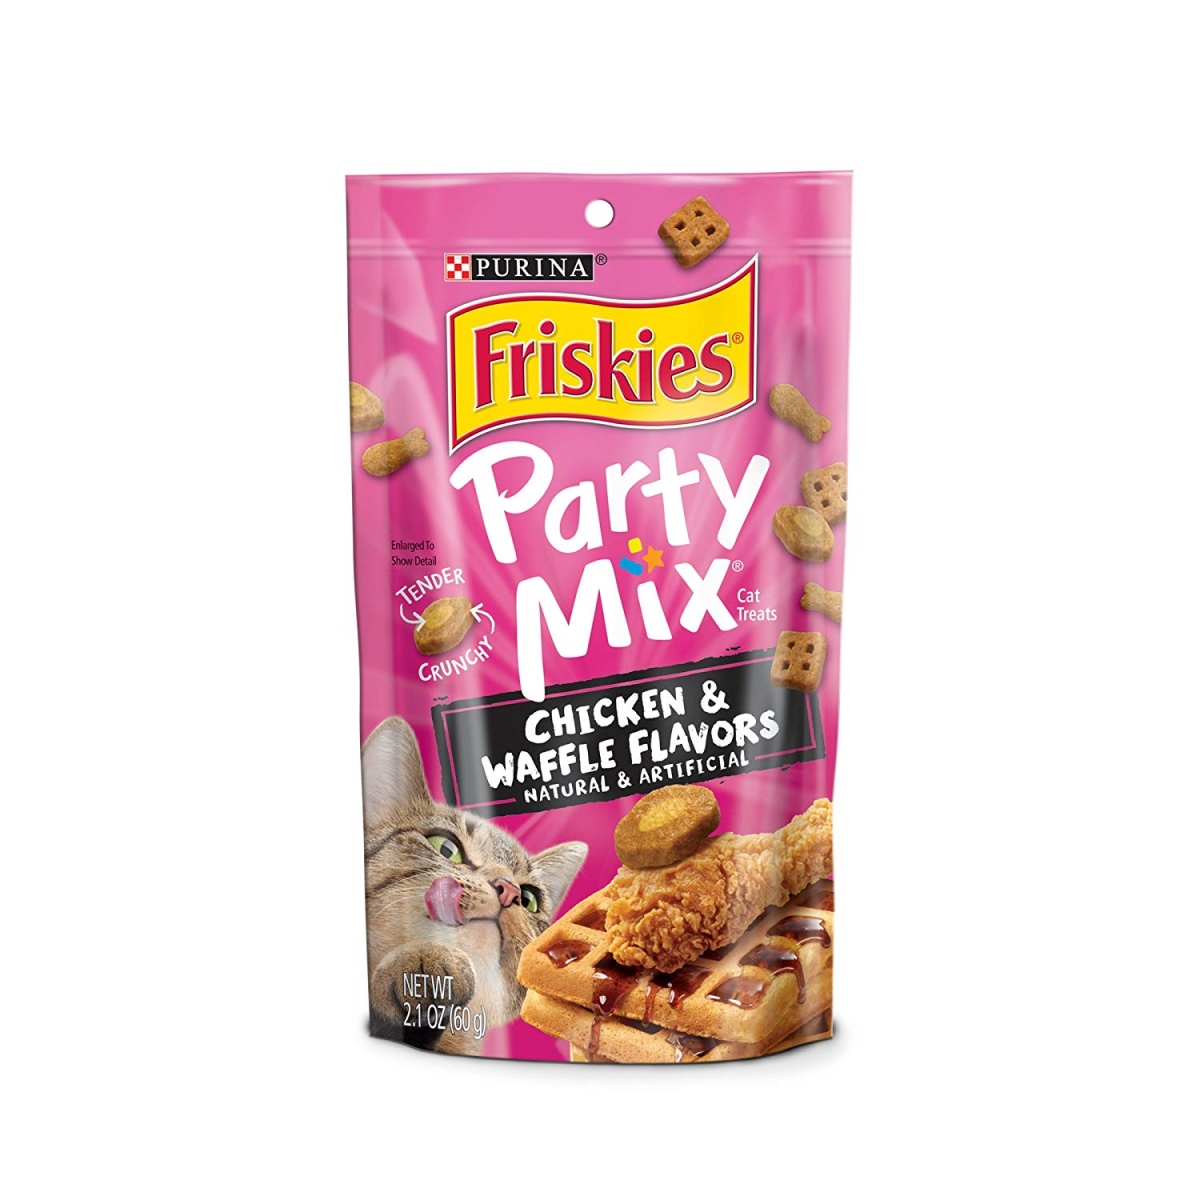 050346 2.1 Oz Friskies Party Mix Chicken & Waffle Flavors Snacks - Pack Of 10